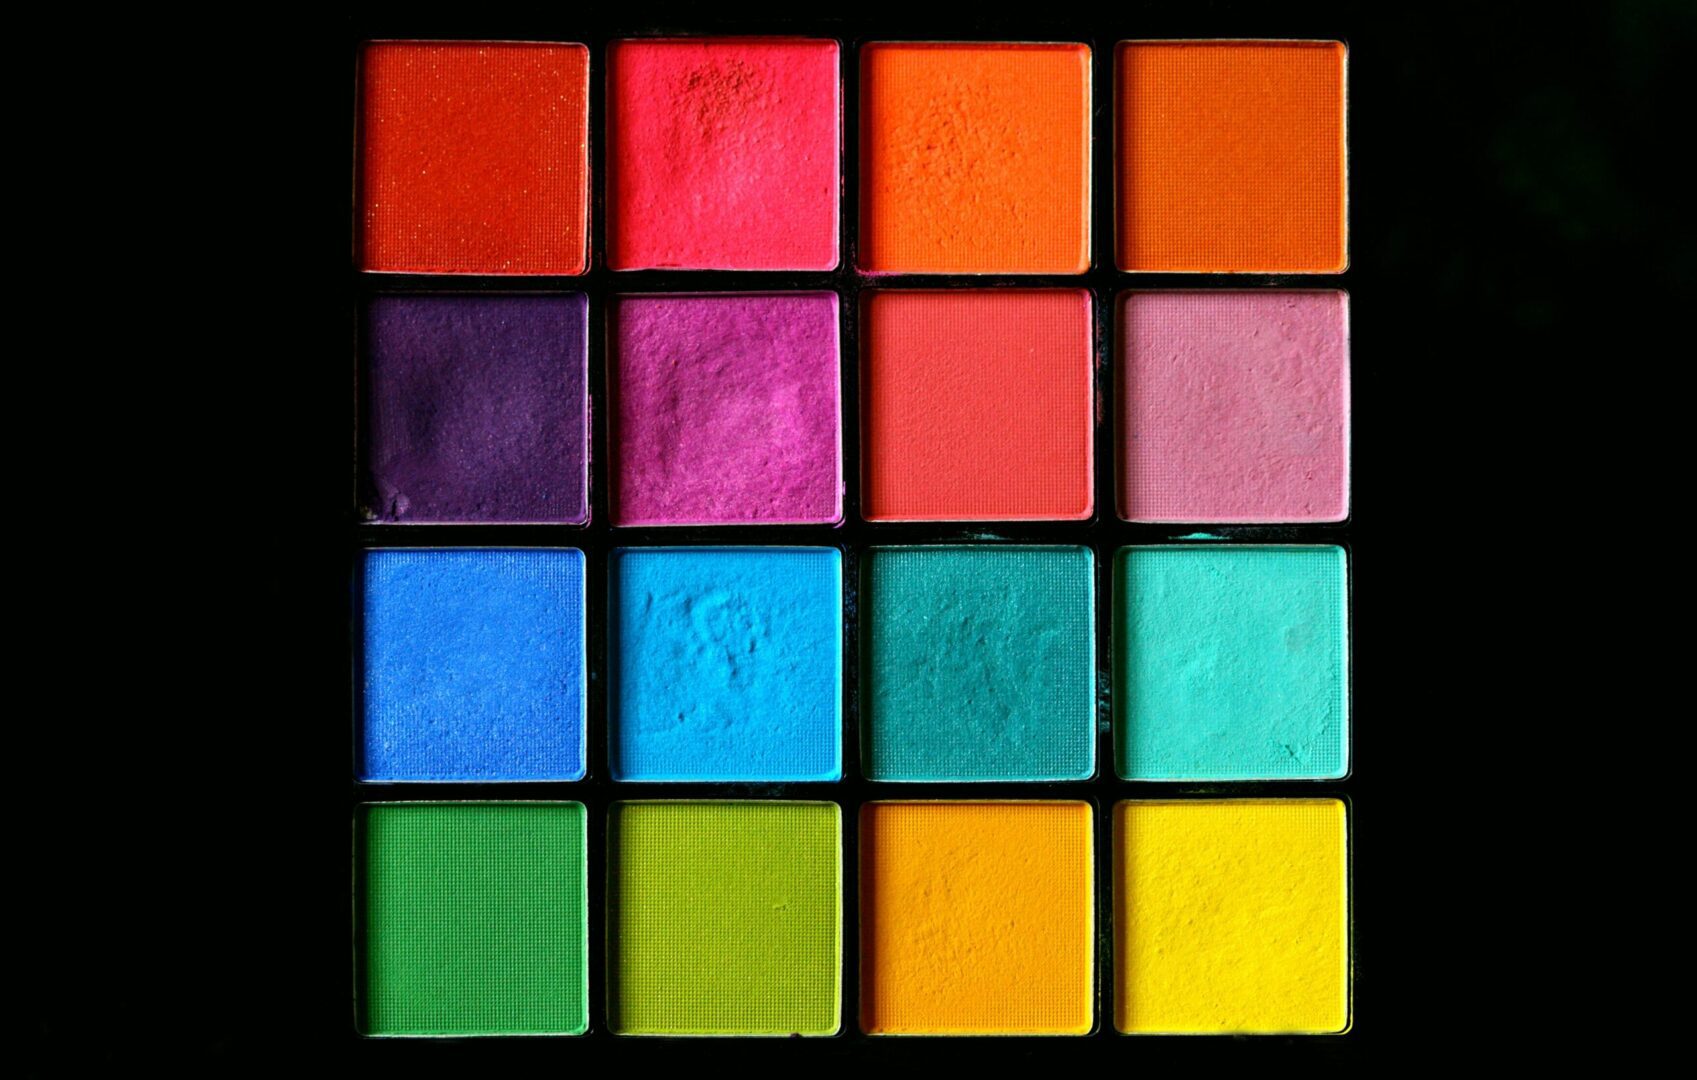 Colorful makeup palettes on a black background.